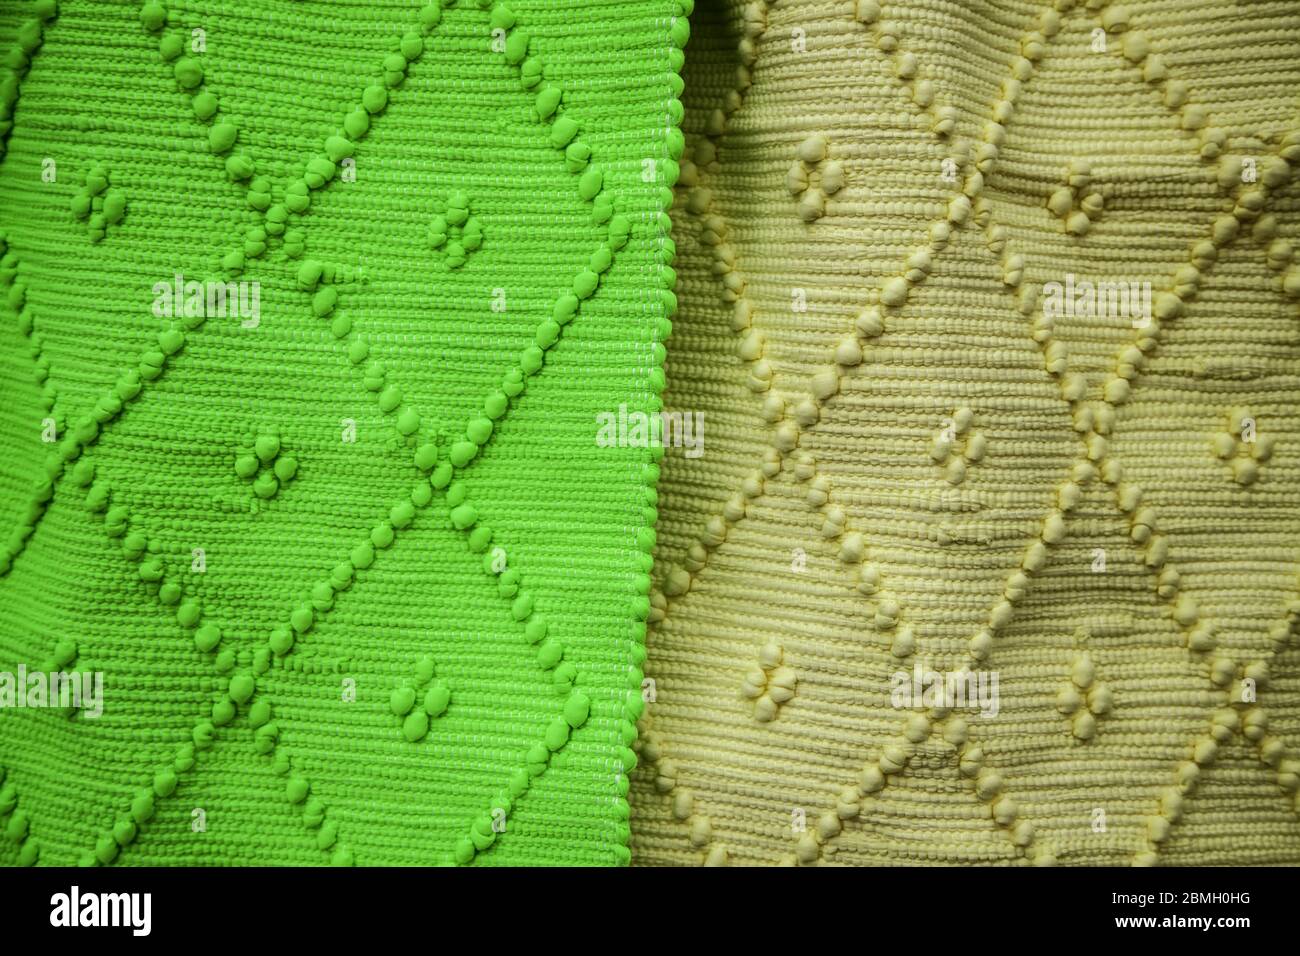 Fabric cotton fabrics, industry and craft work, textile garments Stock Photo